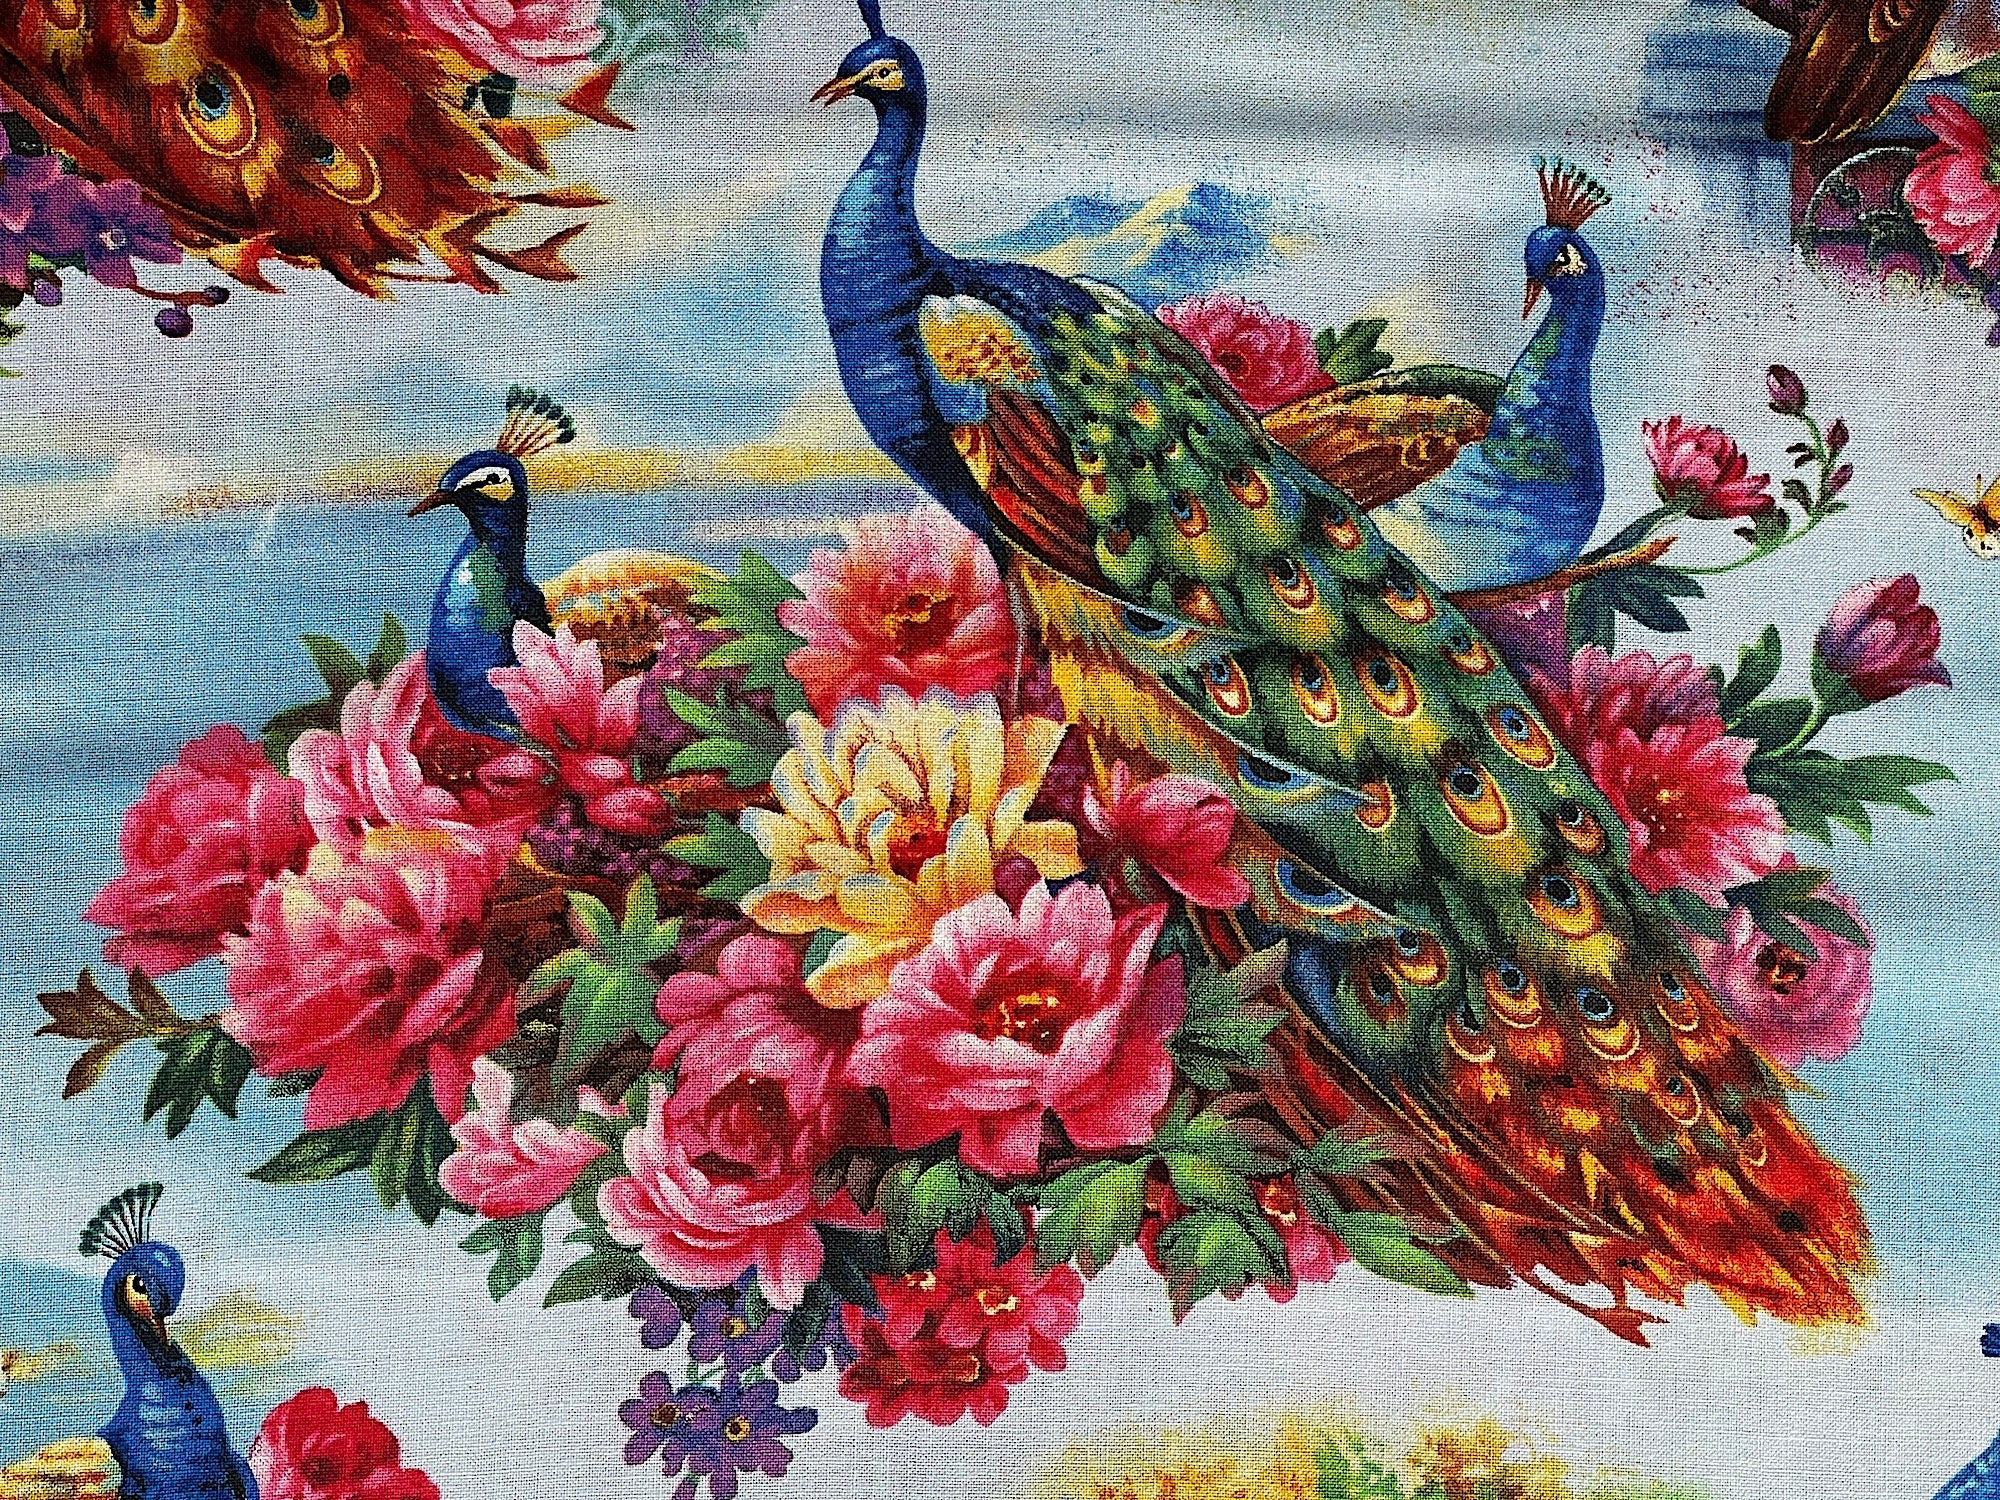 Close up of peacocks and flowers.